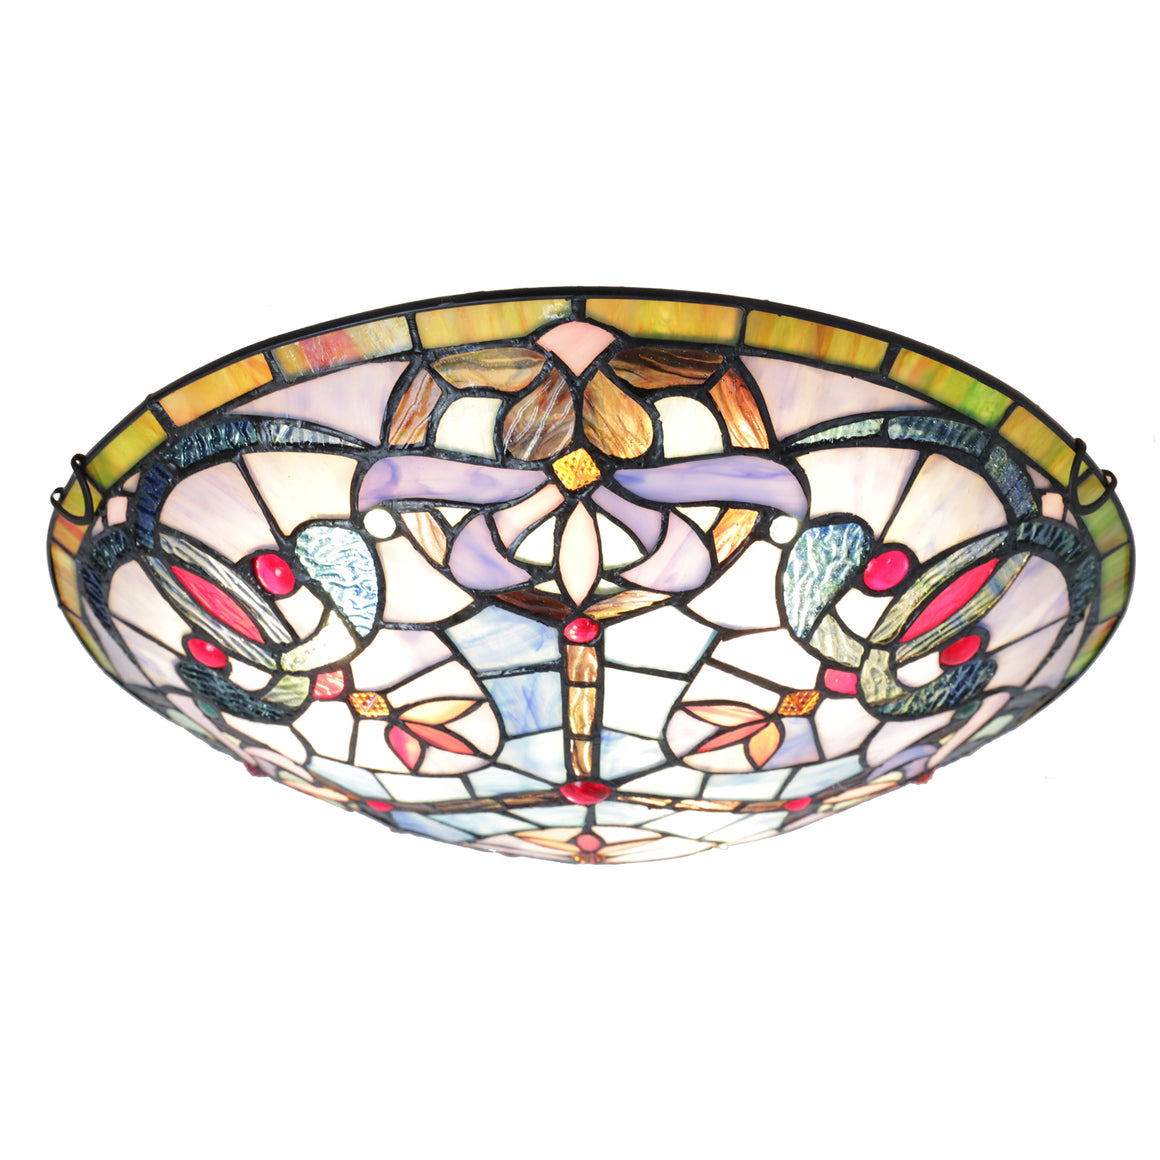 BONLICHT Tiffany Semi Flush Mount Ceiling Light Fixture with 16 Inch Stained Glass Shade 3-Light